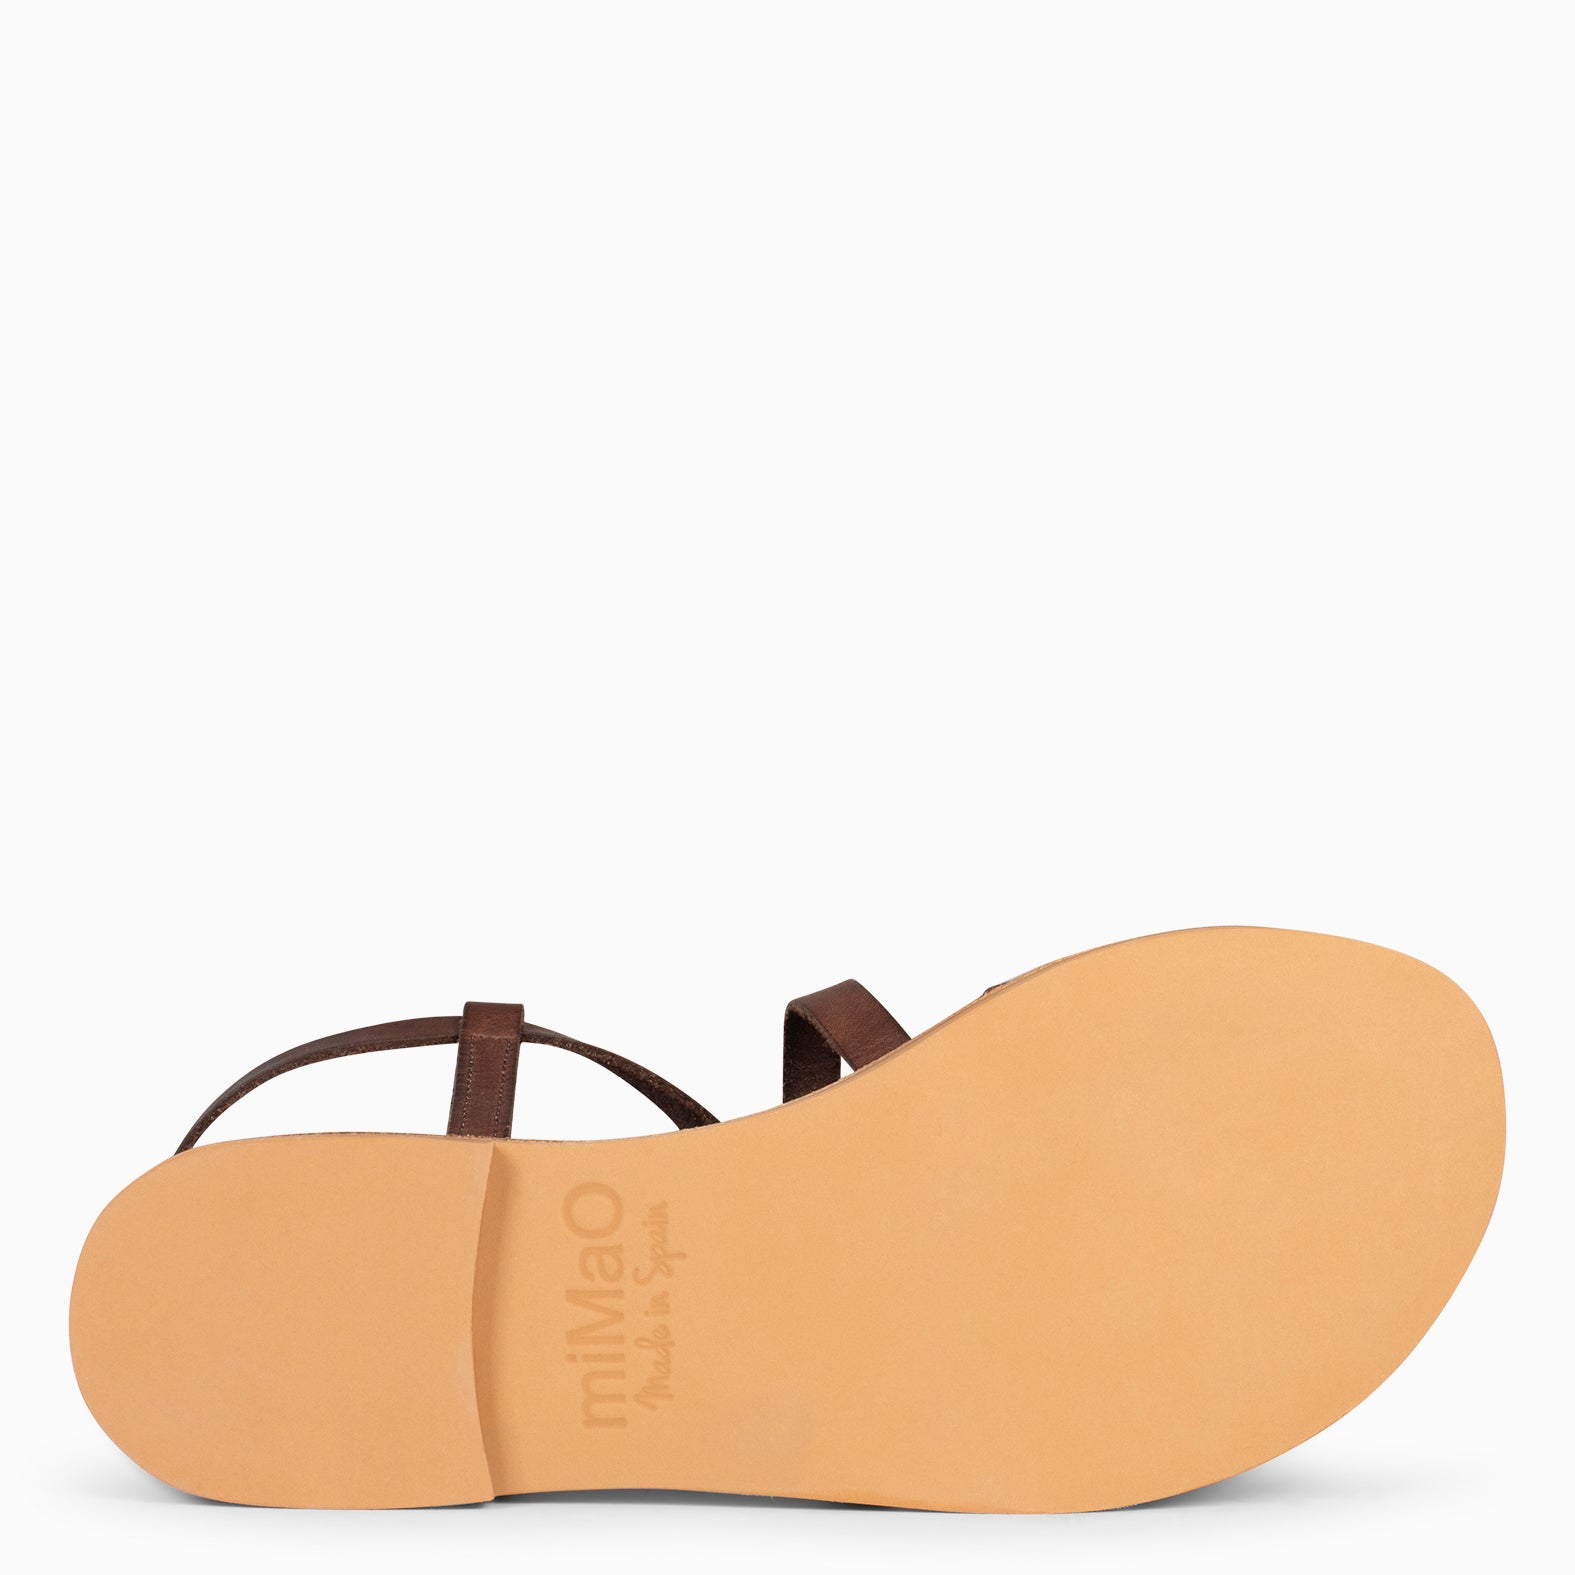 IXORA – BROWN flat sandals with buckle